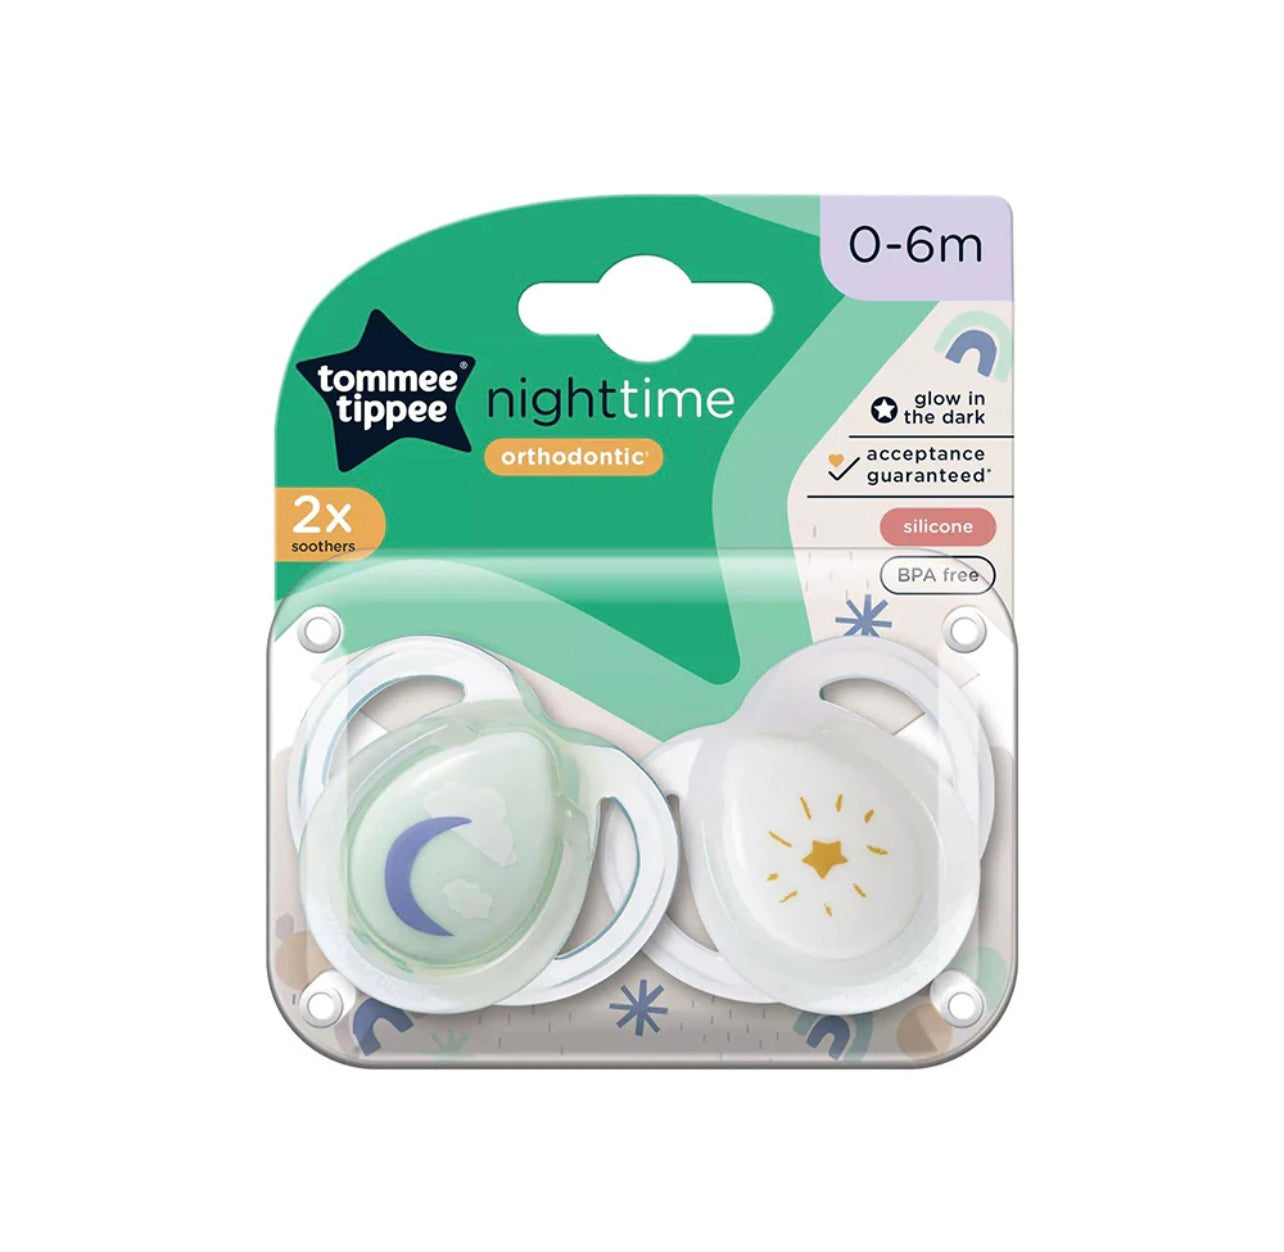 Tommee Tippee night time Soother 0-6m - Assorted Colours